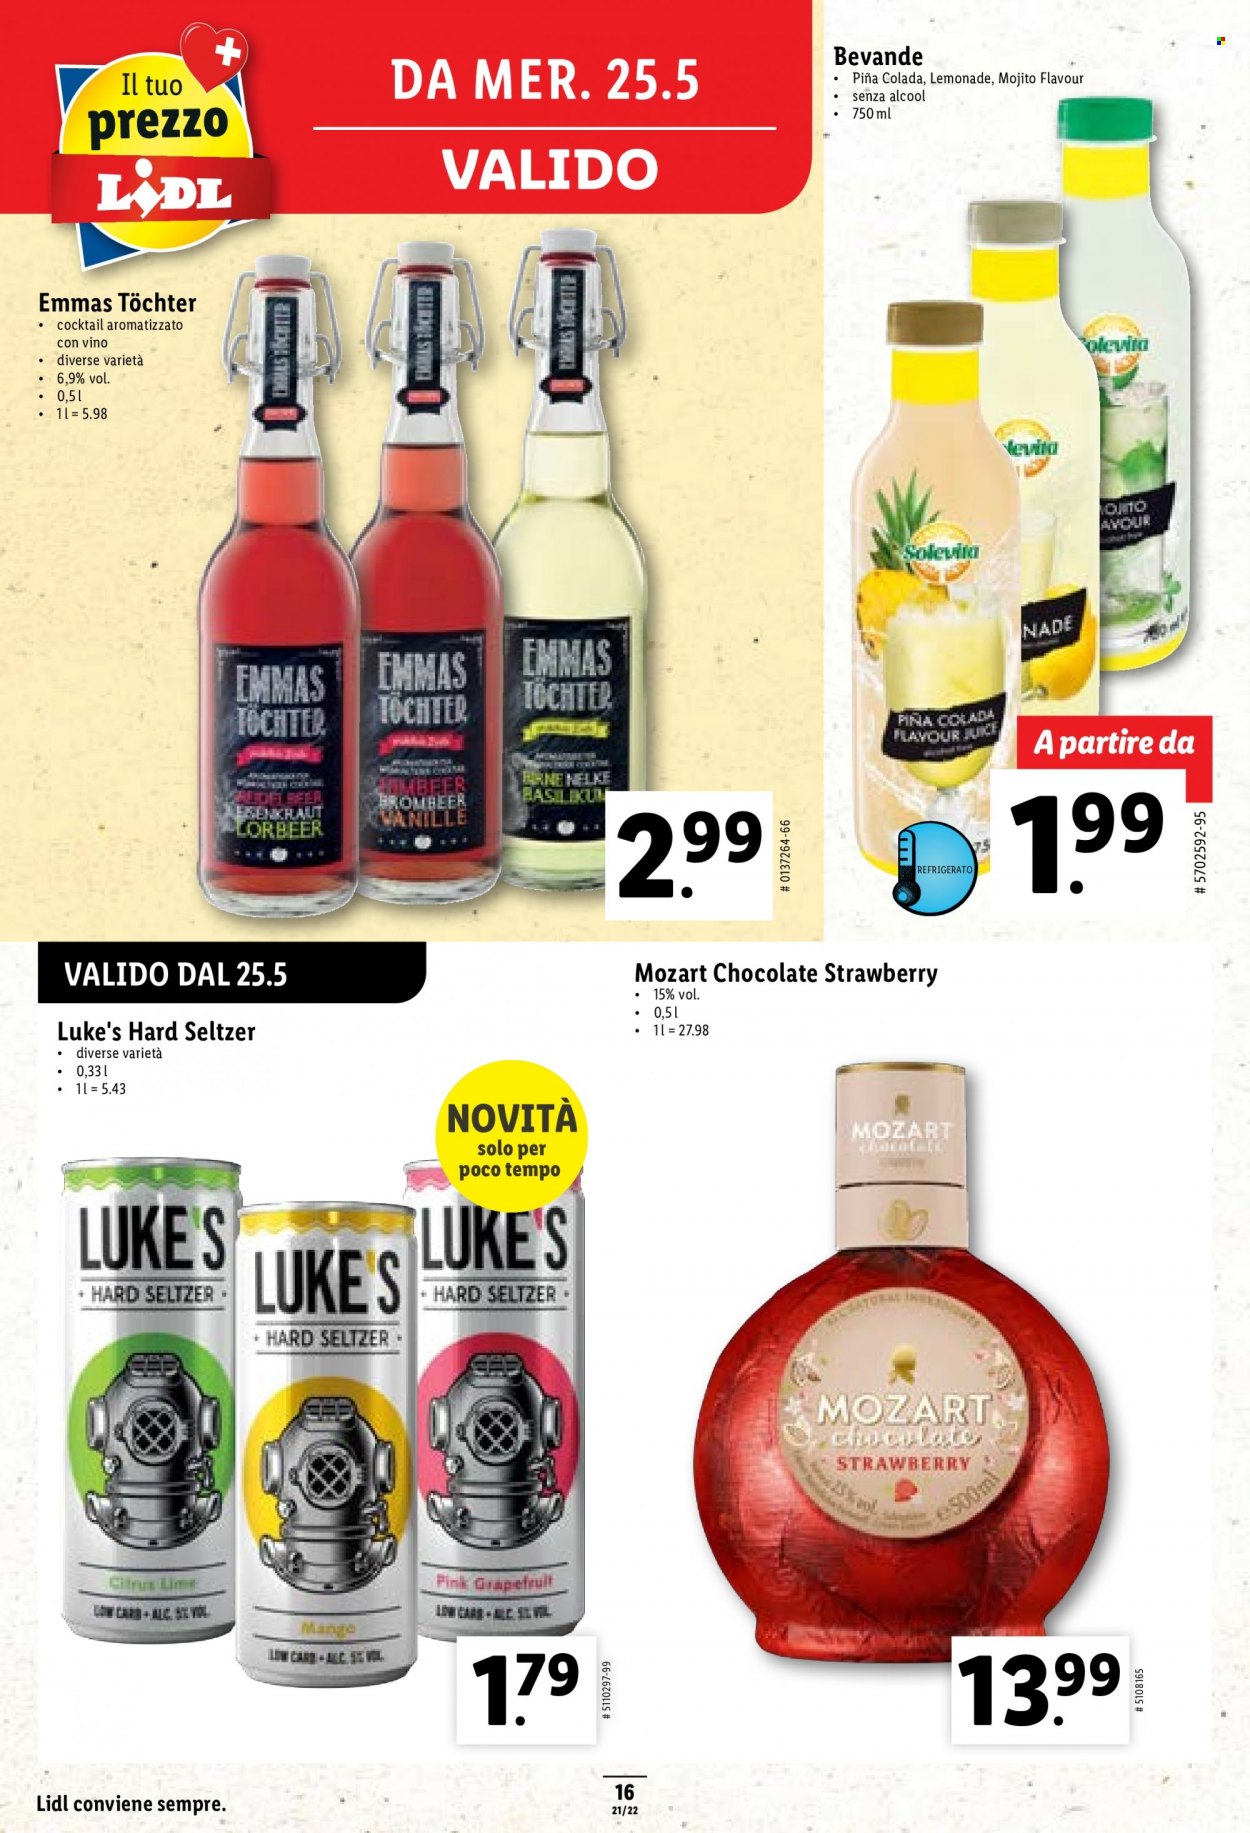 Catalogue Lidl - 25.5.2022 - 1.6.2022. Page 16.